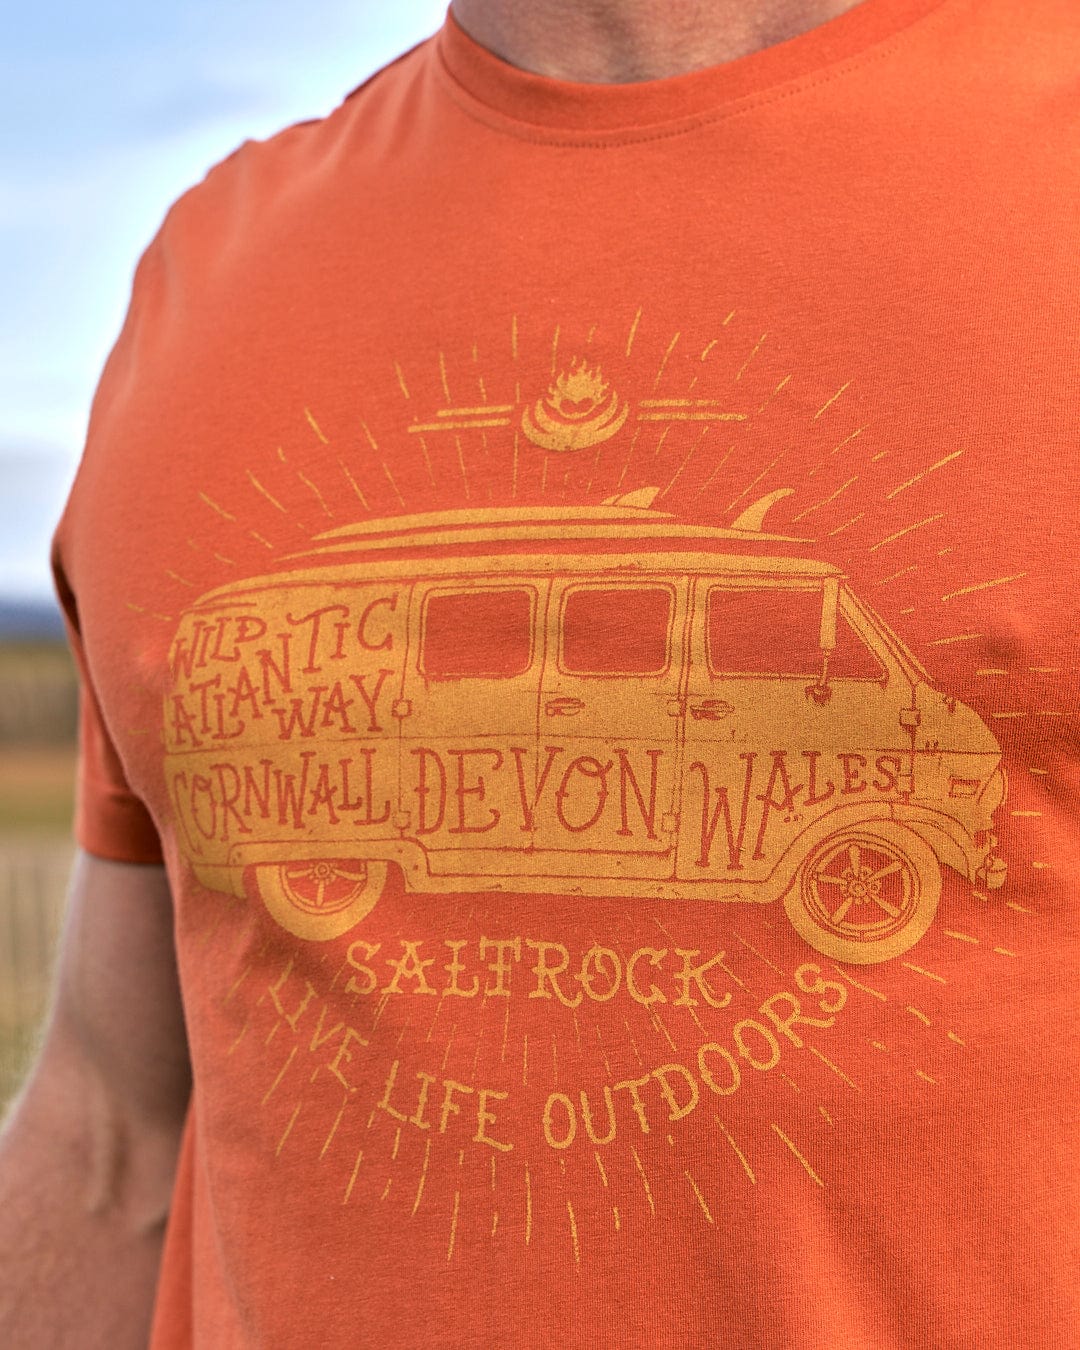 A man wearing a Live Life Location - Mens Short Sleeve T-Shirt - Orange with a van on it by Saltrock.